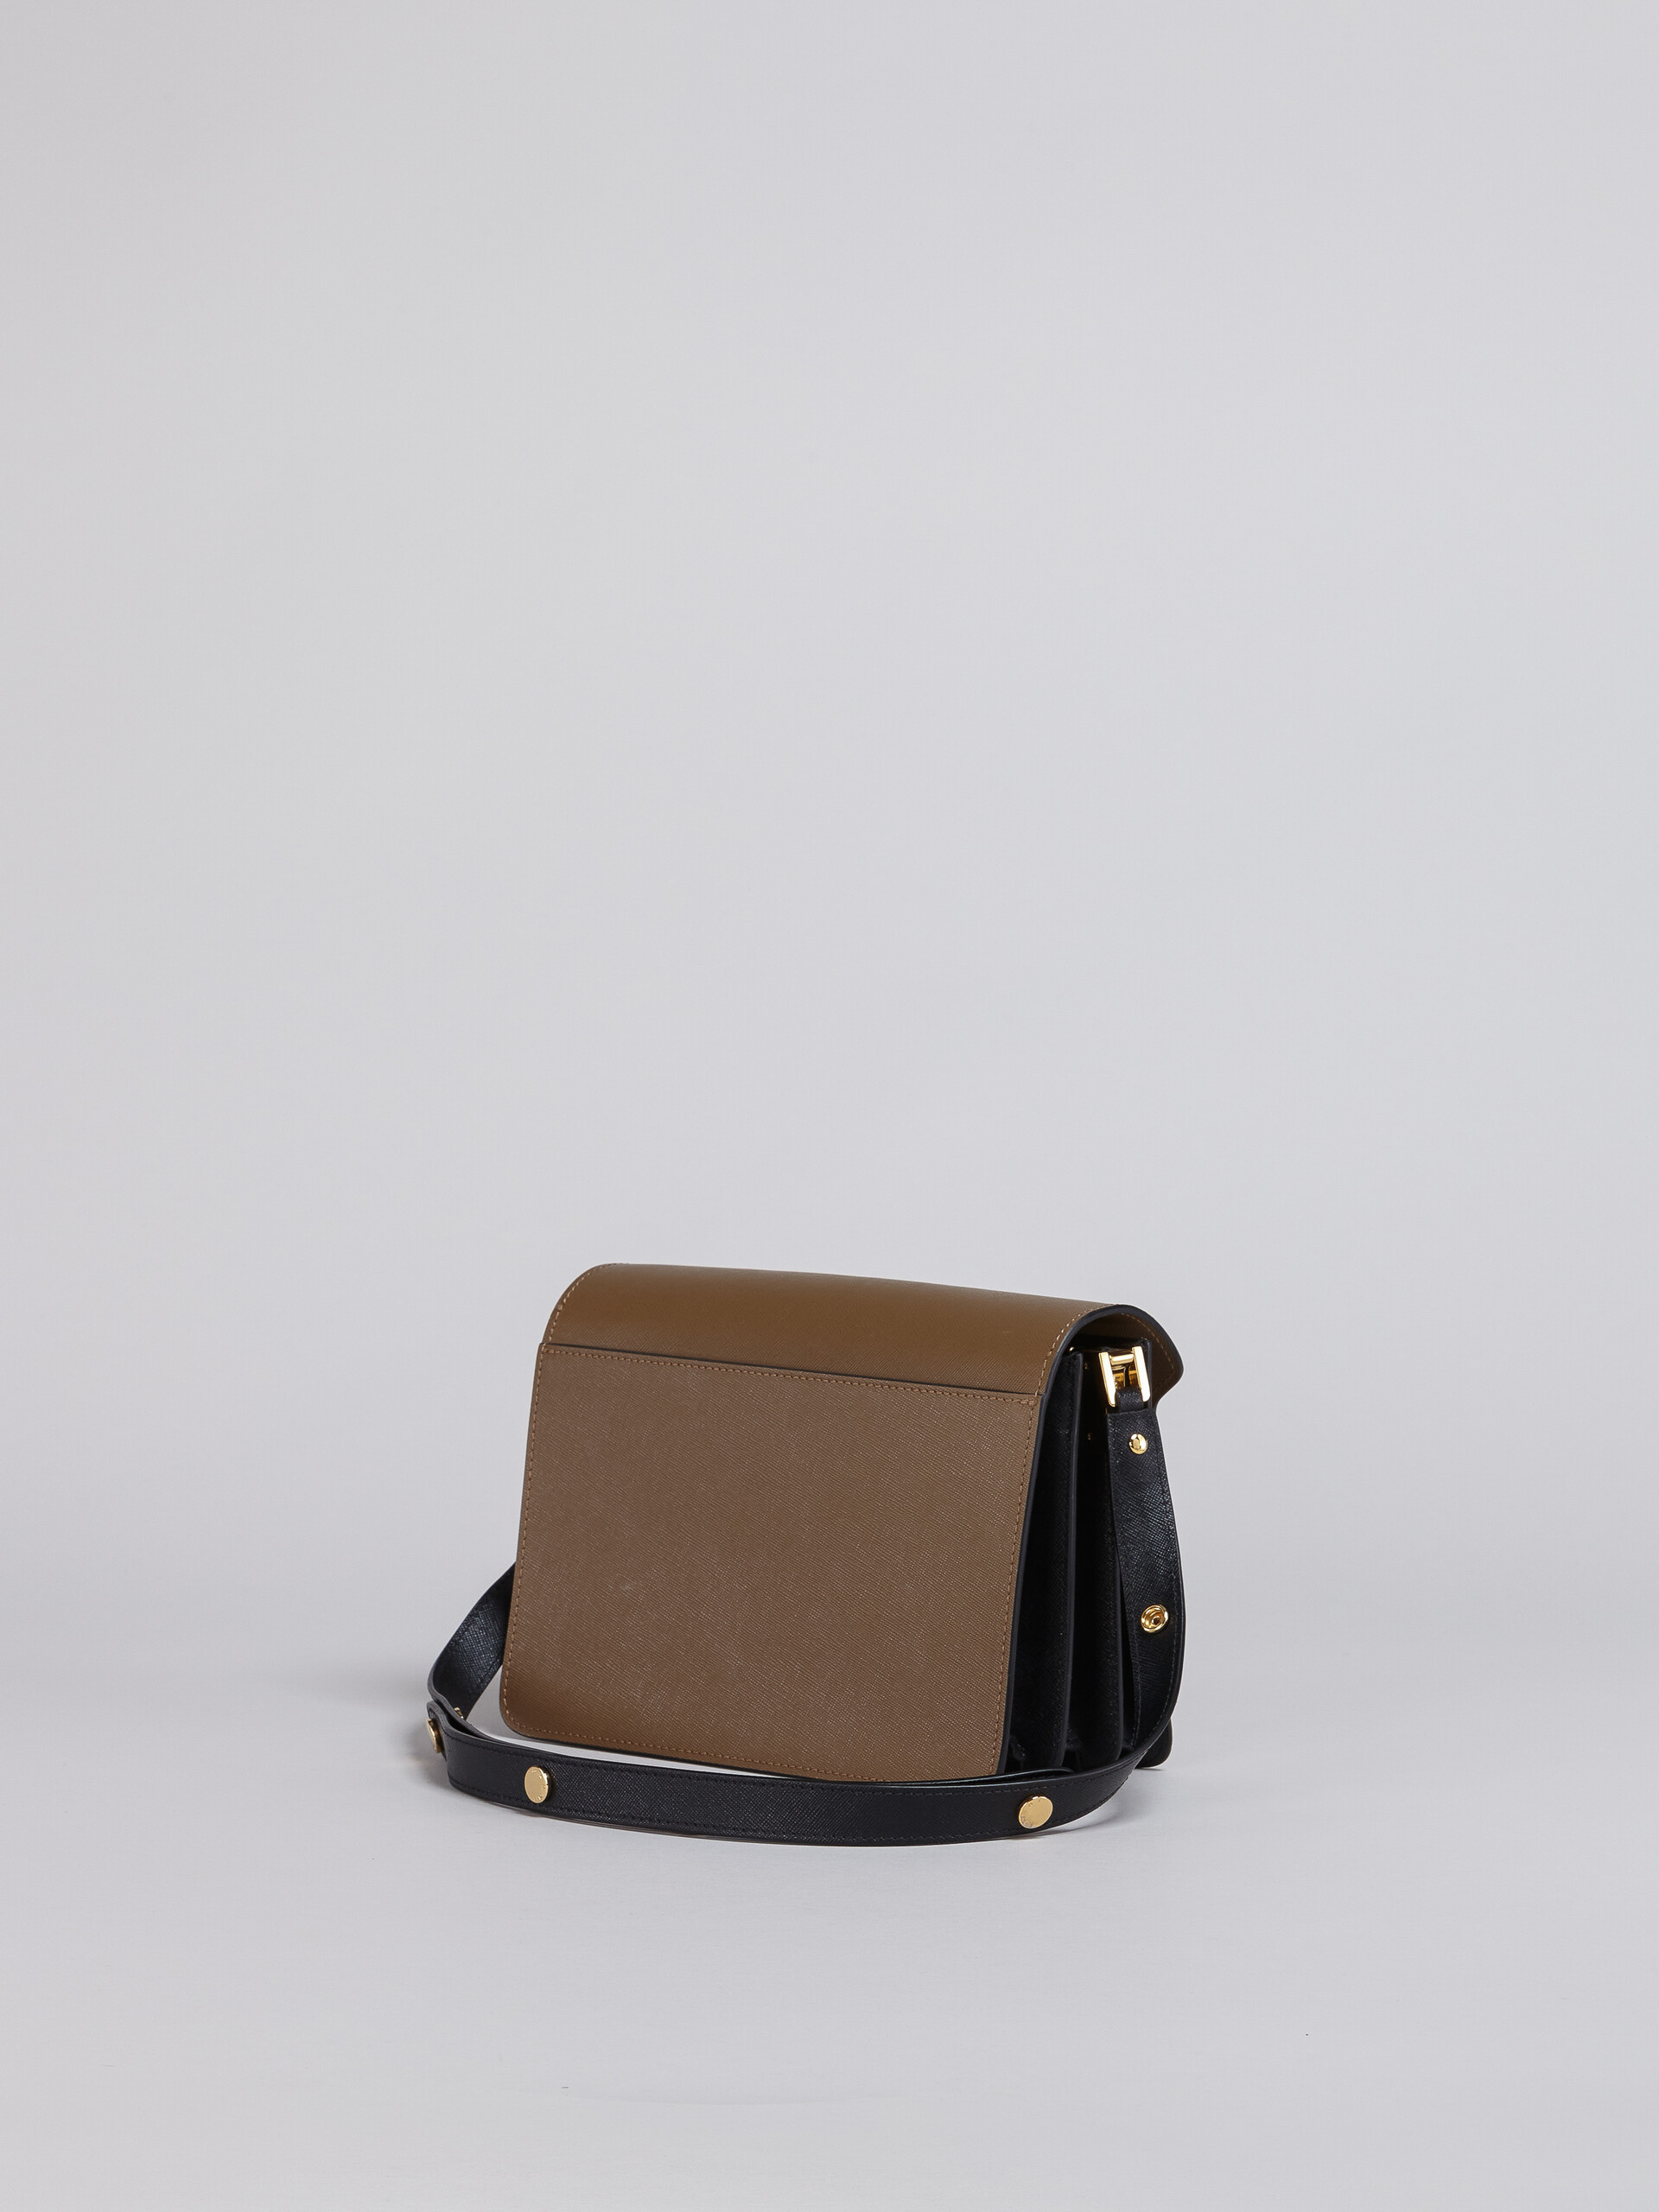 TRUNK bag in saffiano calf brown white and black - Shoulder Bags - Image 2